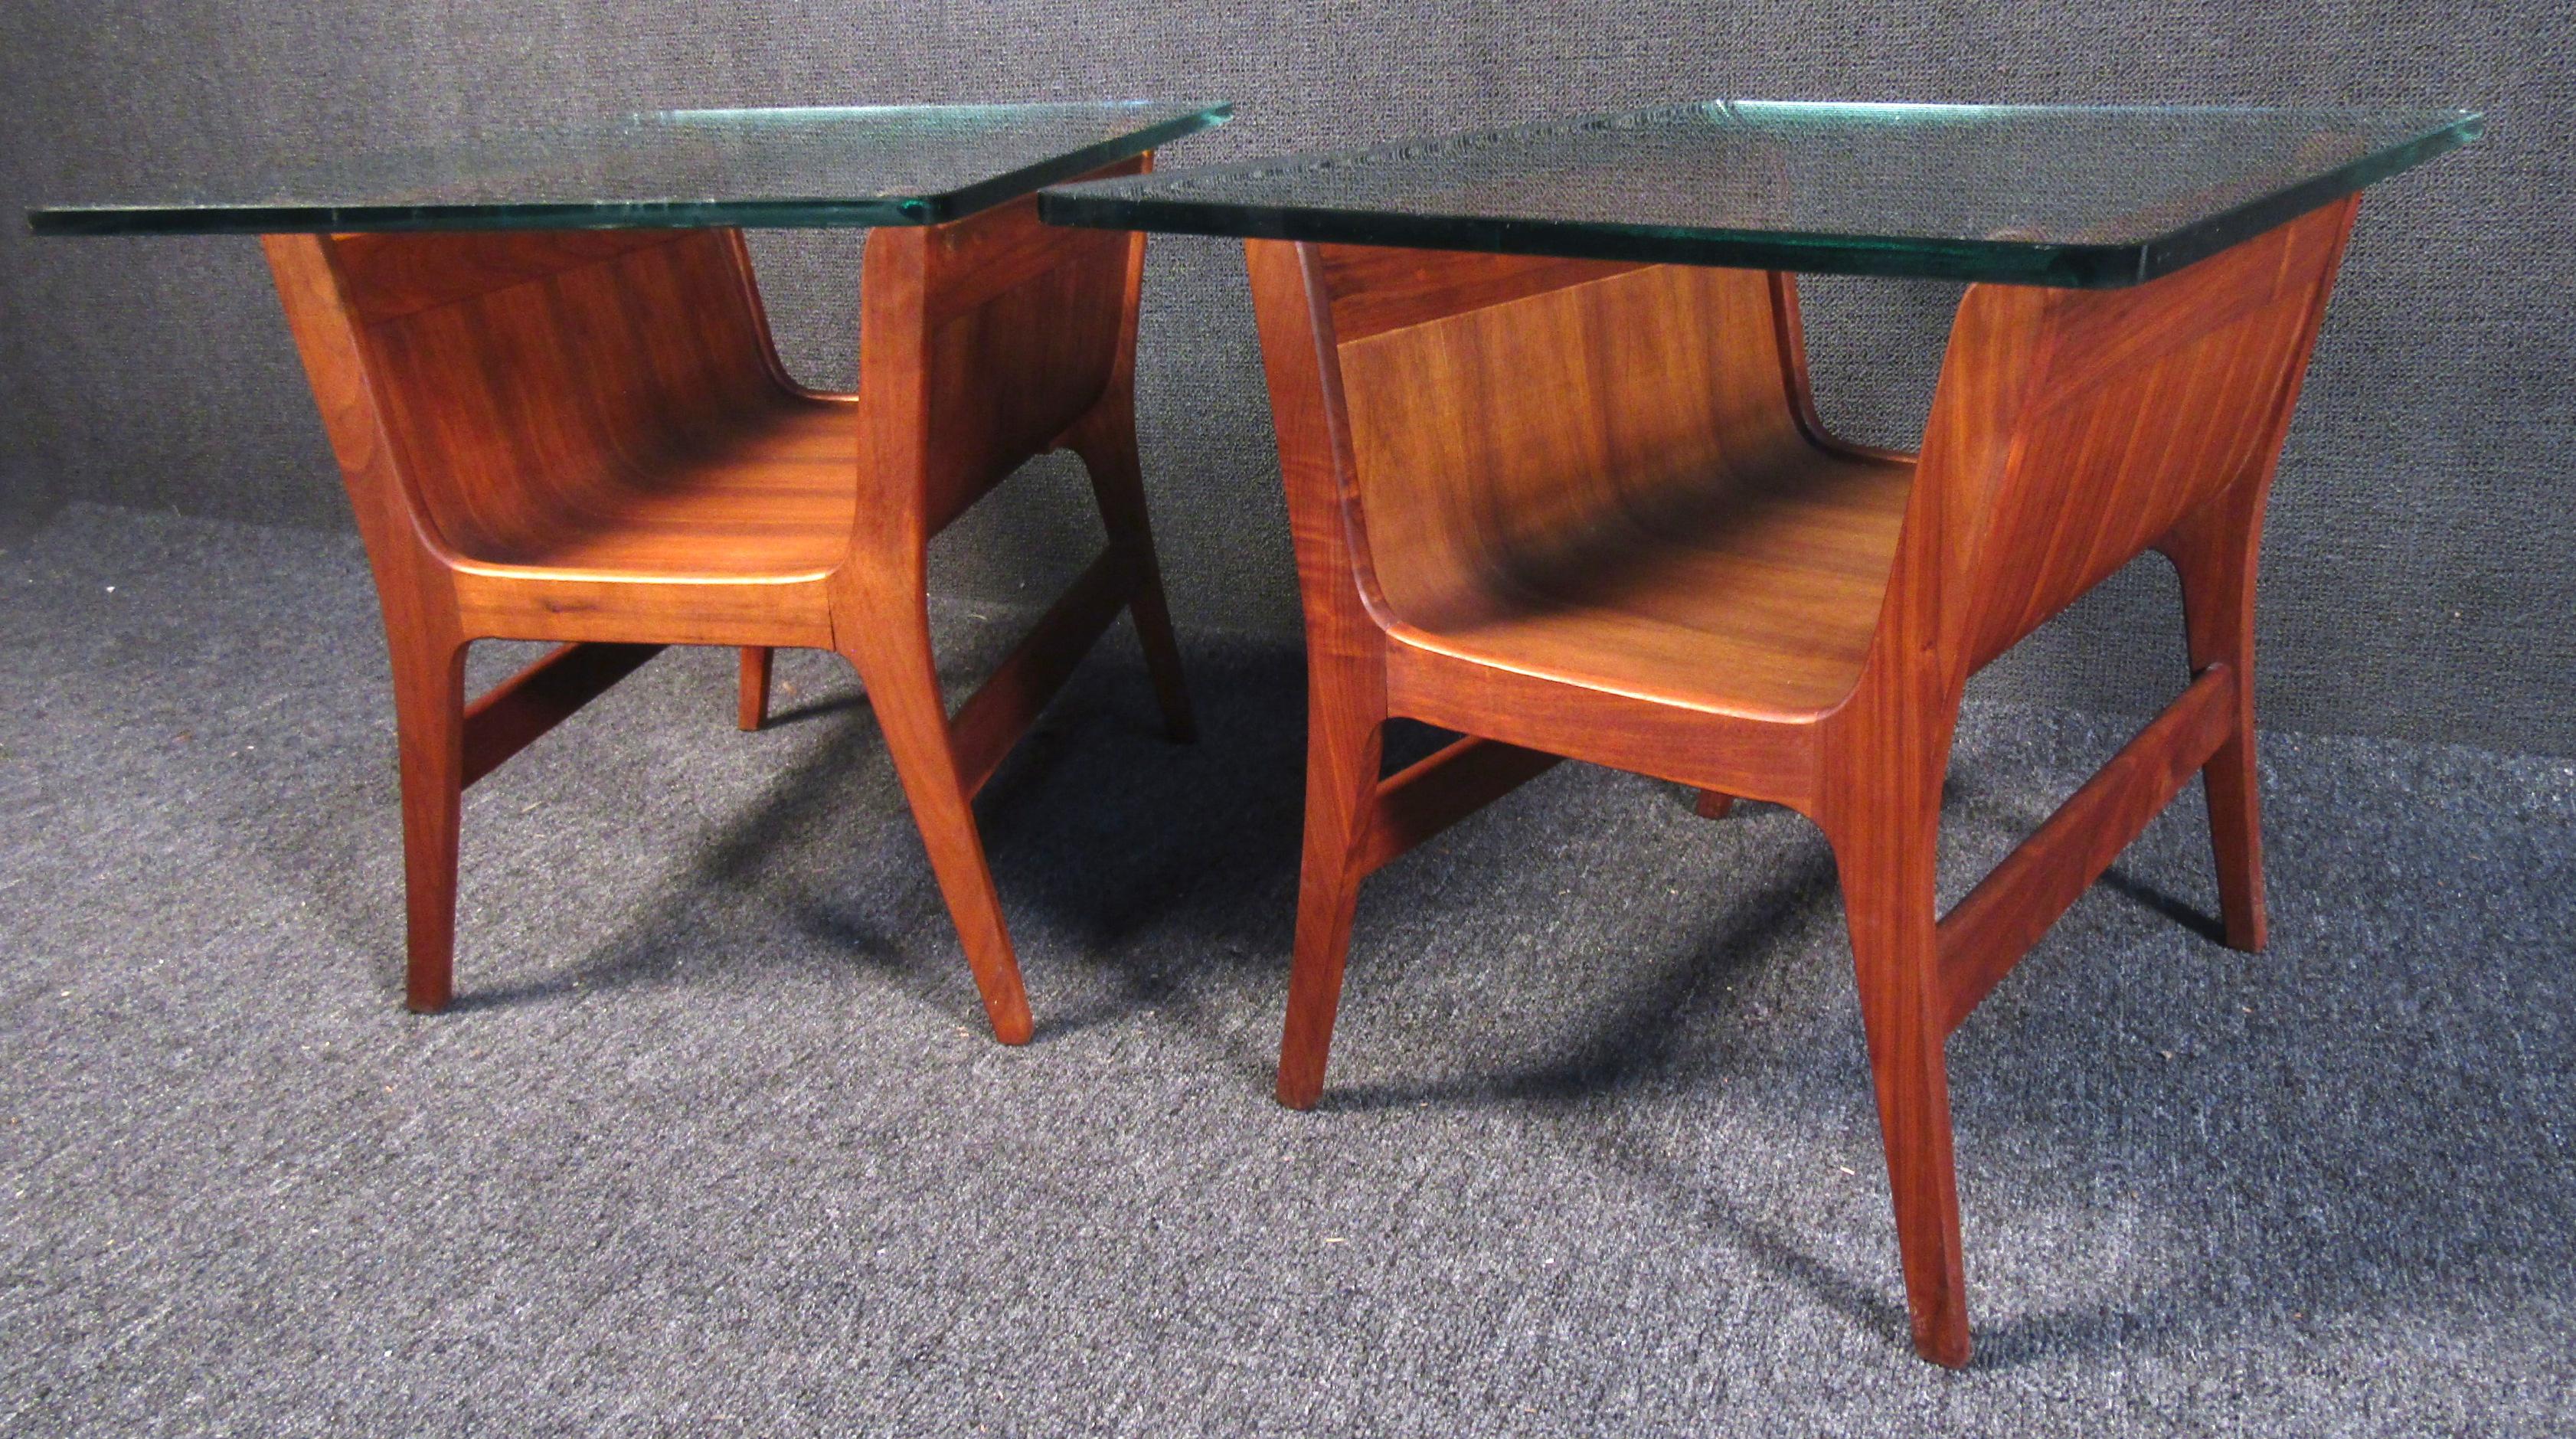 Beautiful Mid-Century Modern Sculptural Wood Side Tables with Glass Tops For Sale 2